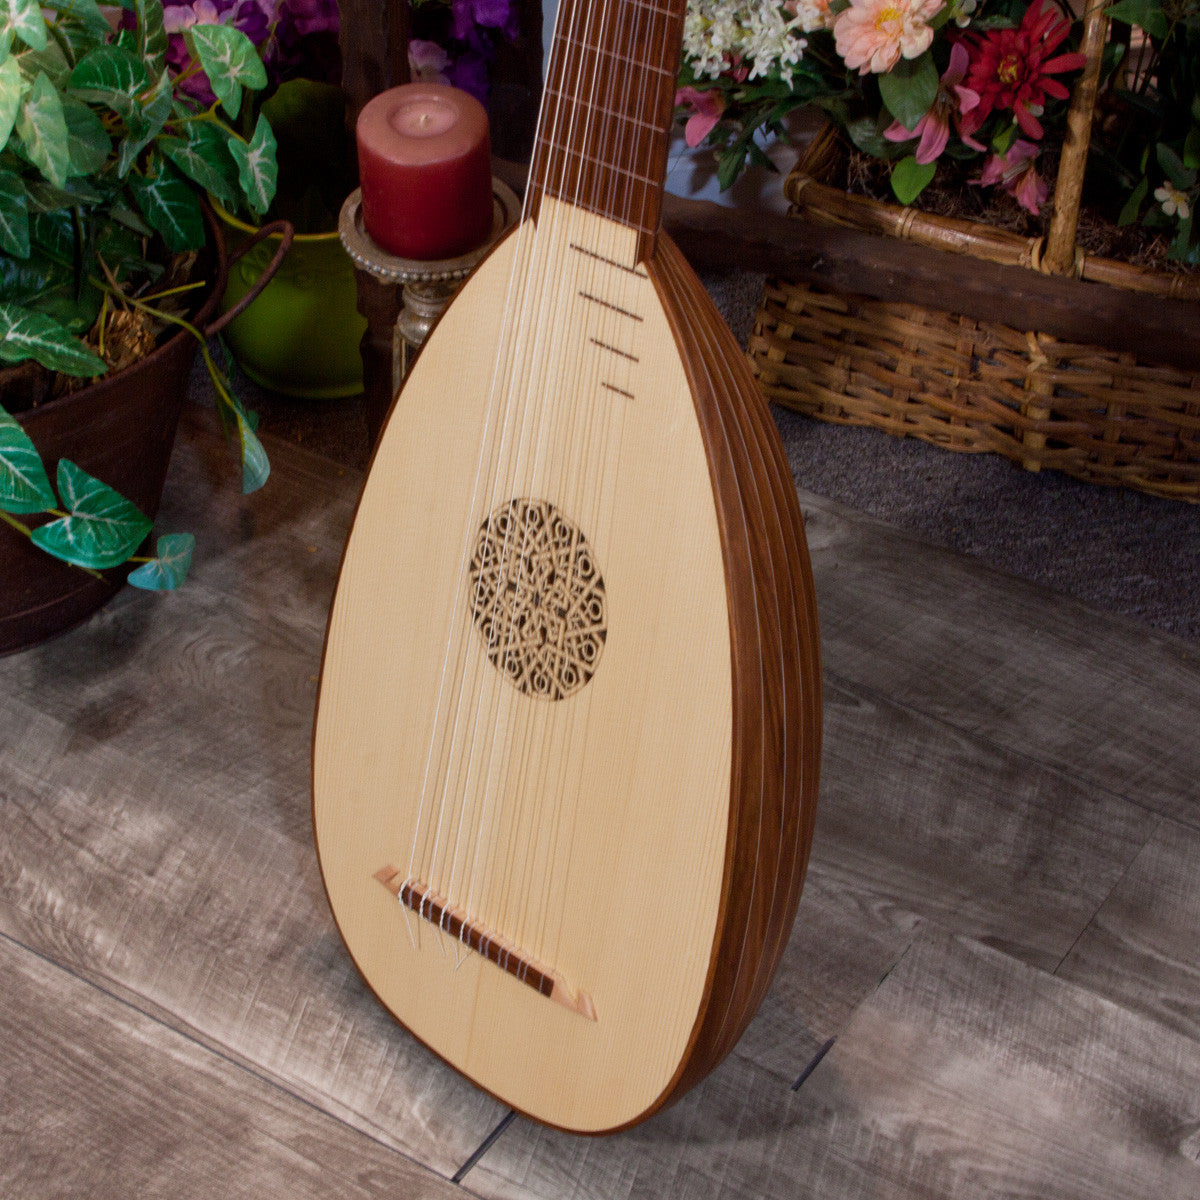 Roosebeck Deluxe 8-Course Lute Sheesham Lutes Roosebeck   